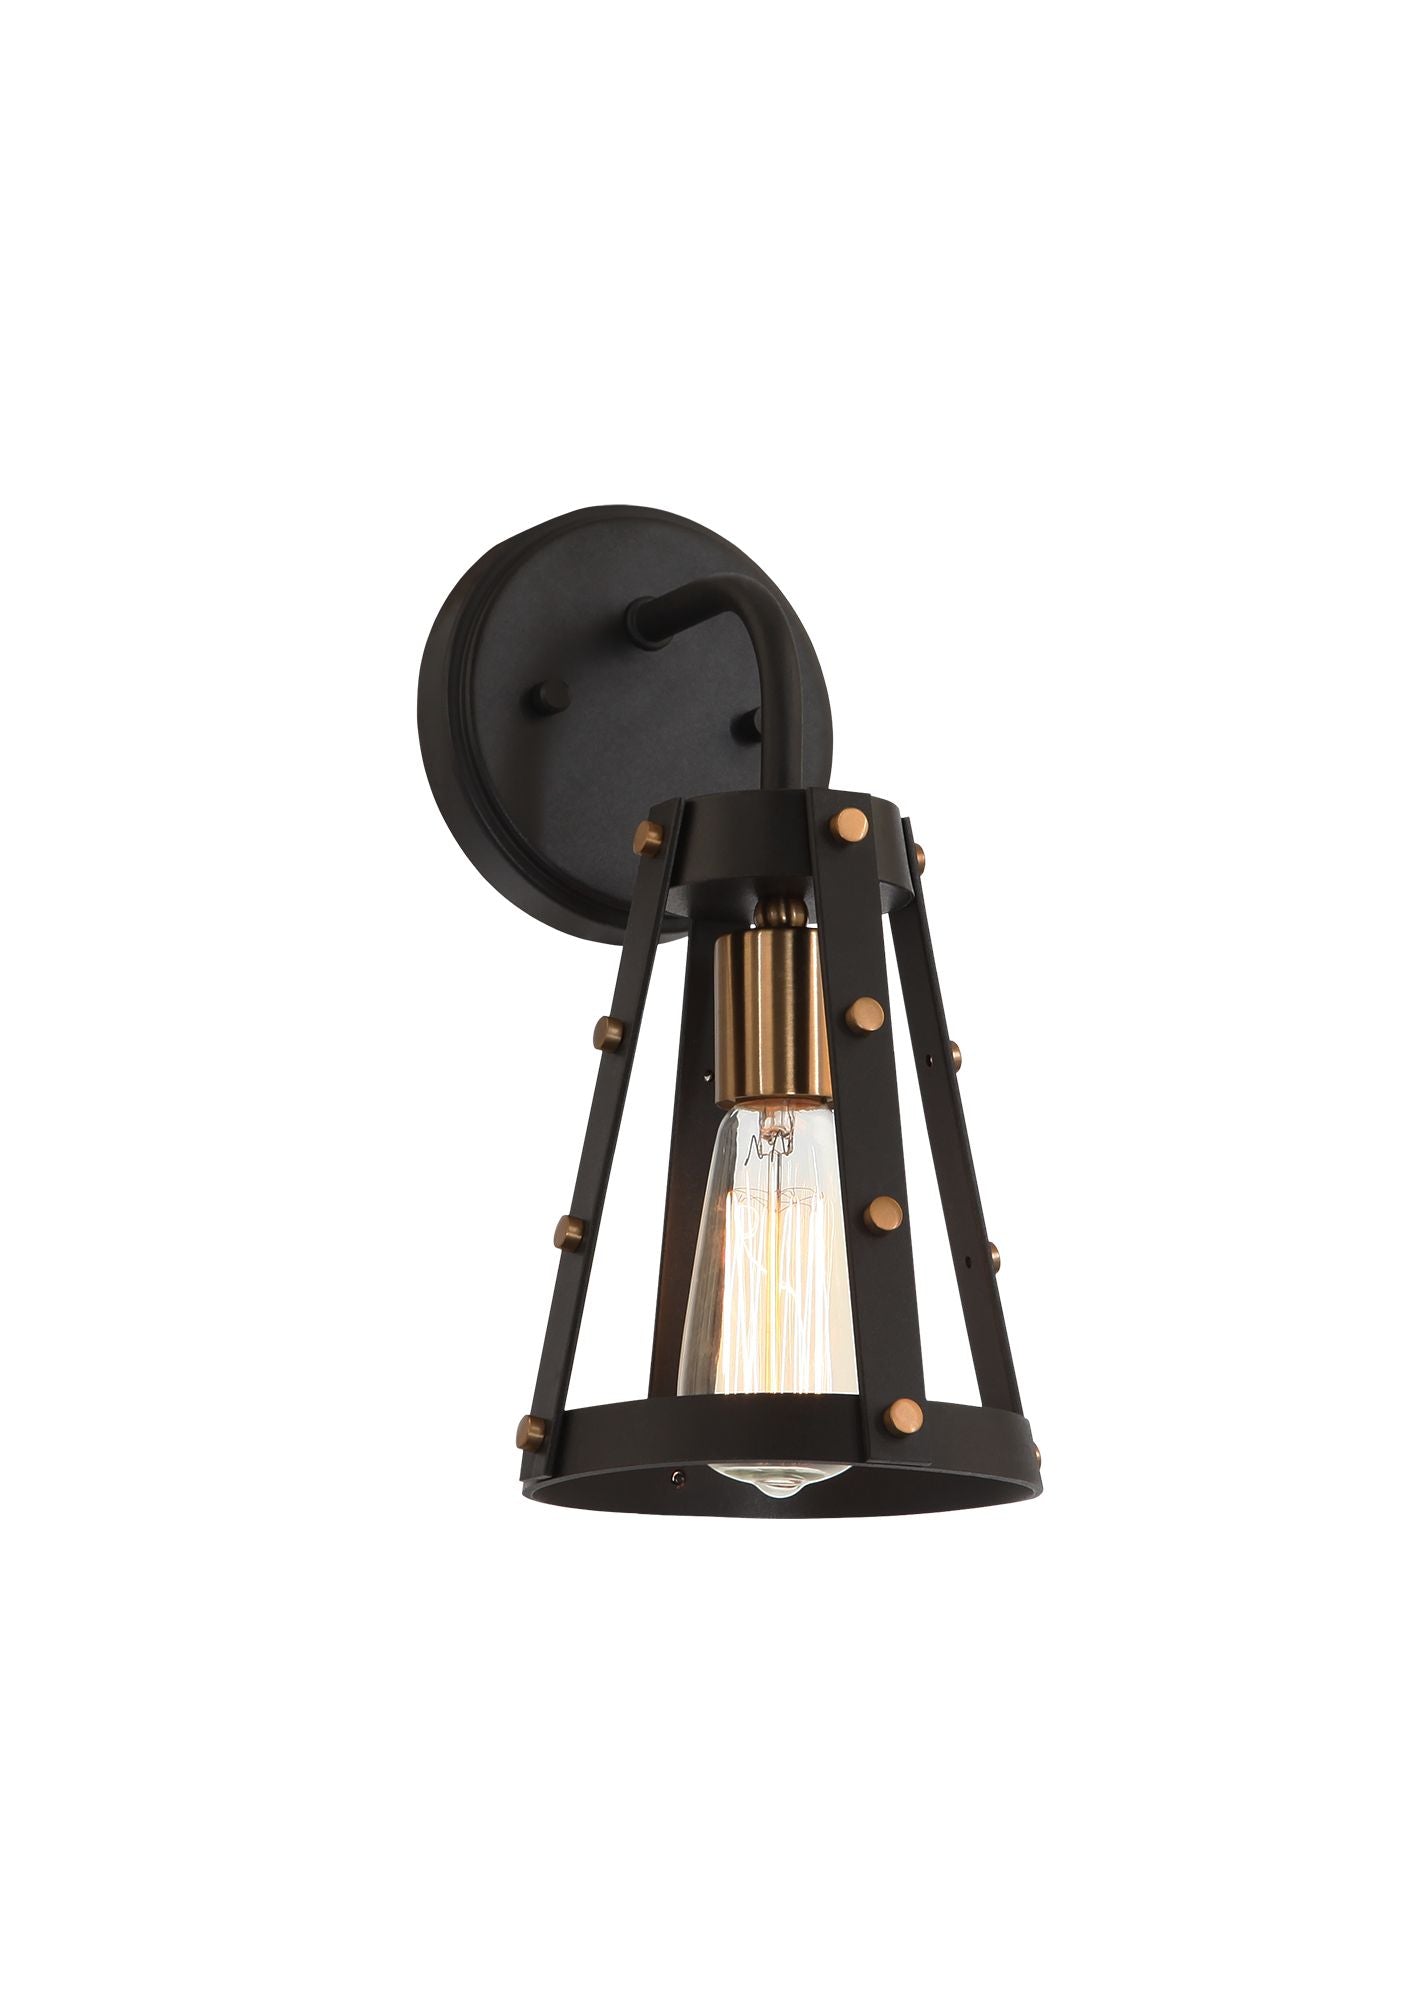 BEATON Wall sconce Black, Gold - W72001MBAG | TEO